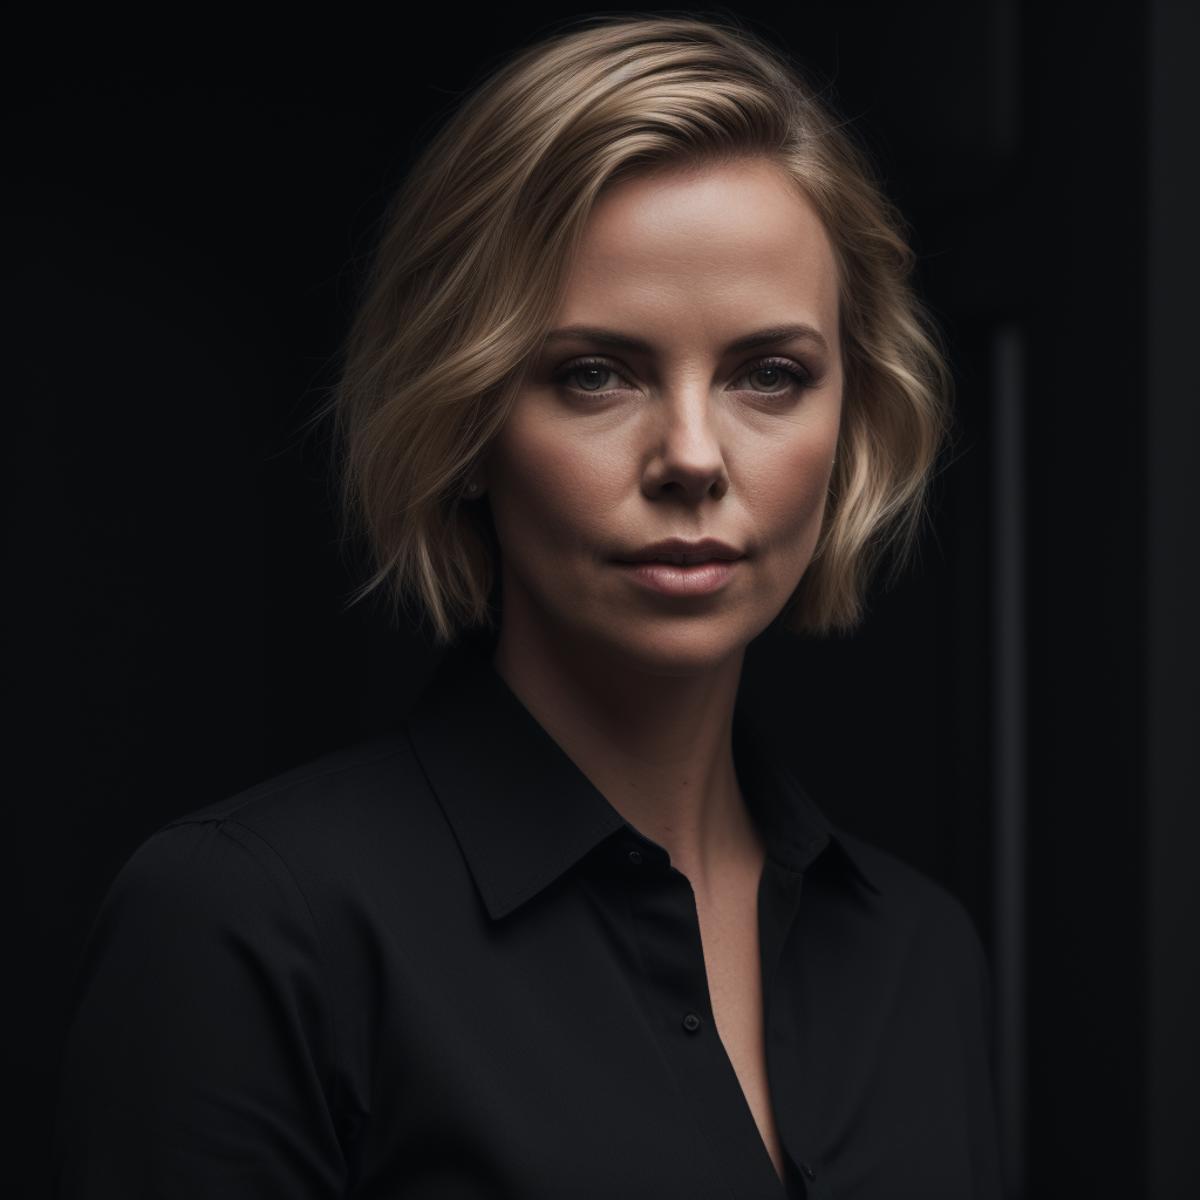 Charlize Theron image by infamous__fish